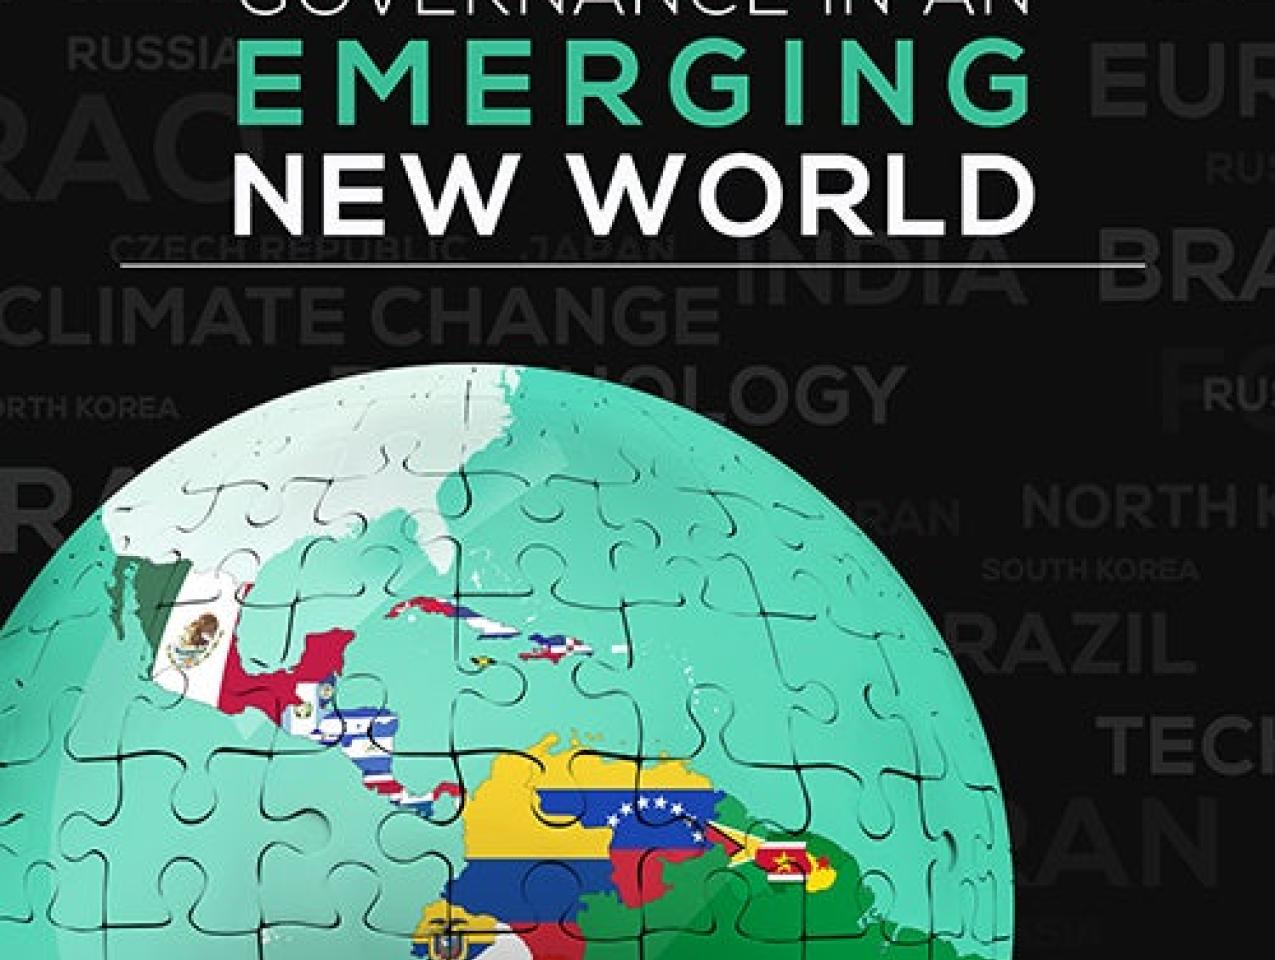 Image for Governance In An Emerging New World: Latin America